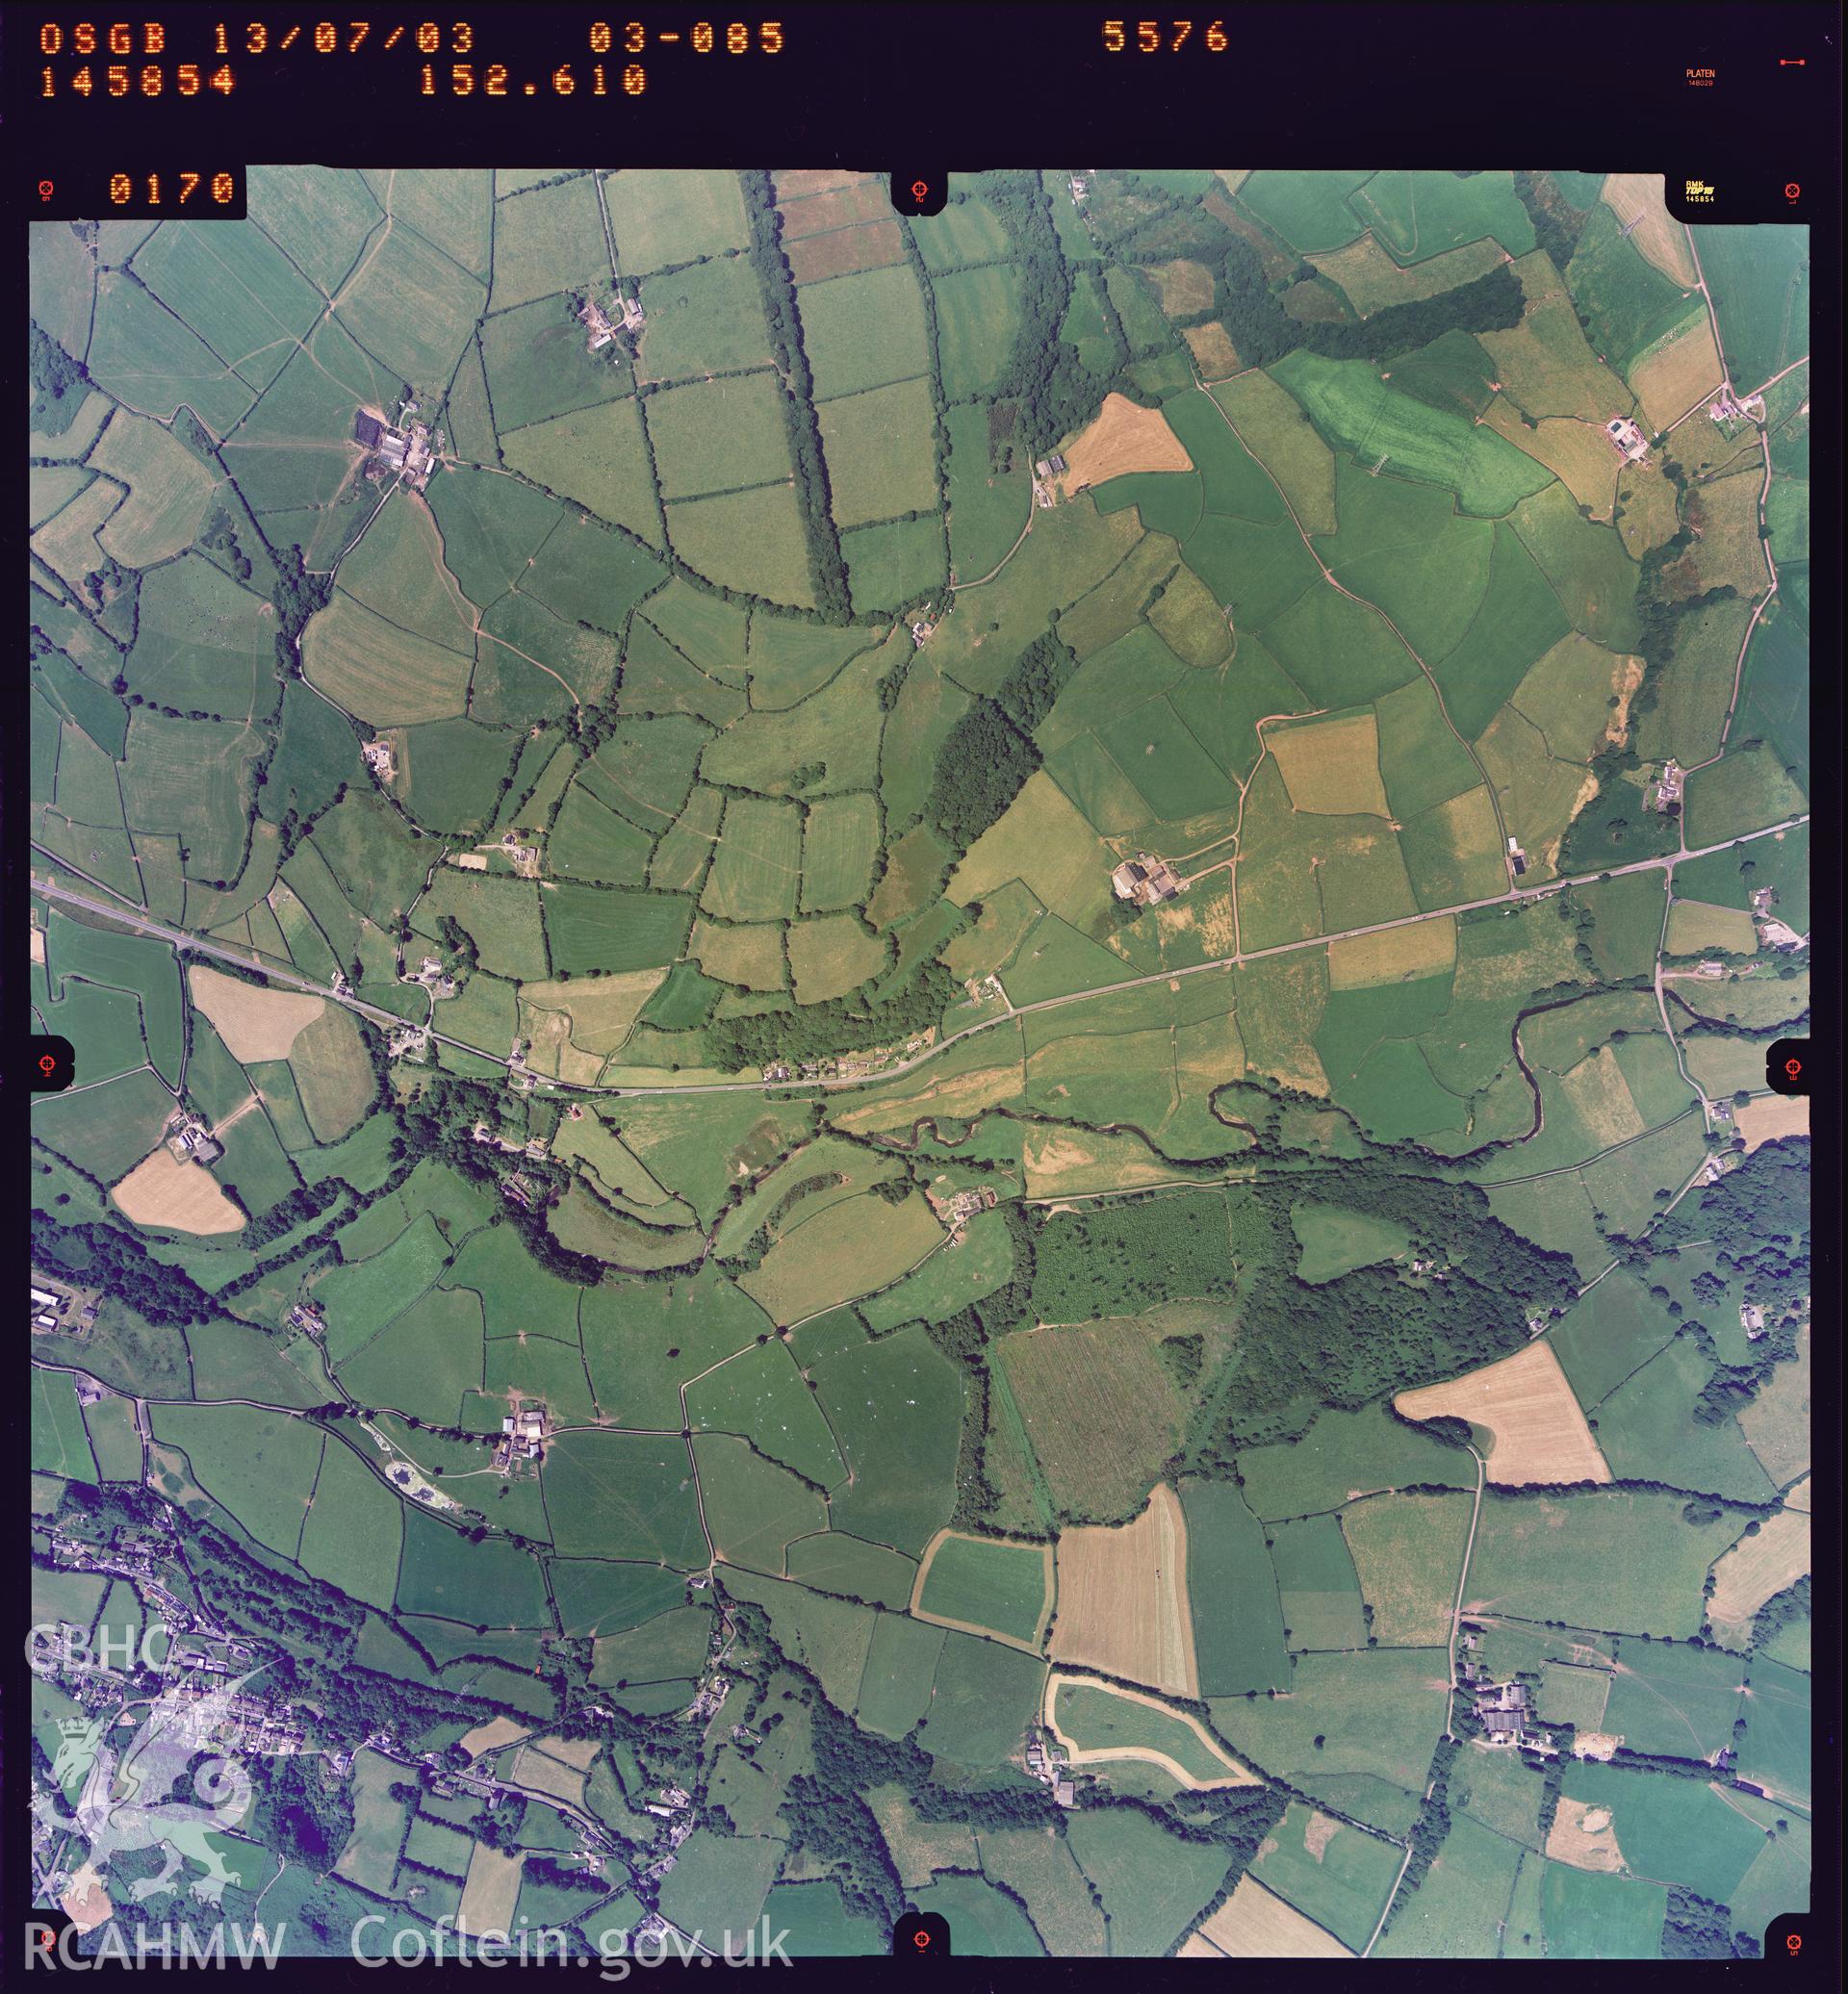 Digital copy of an aerial view of Kidwelly by Ordnance Survey, 2003.